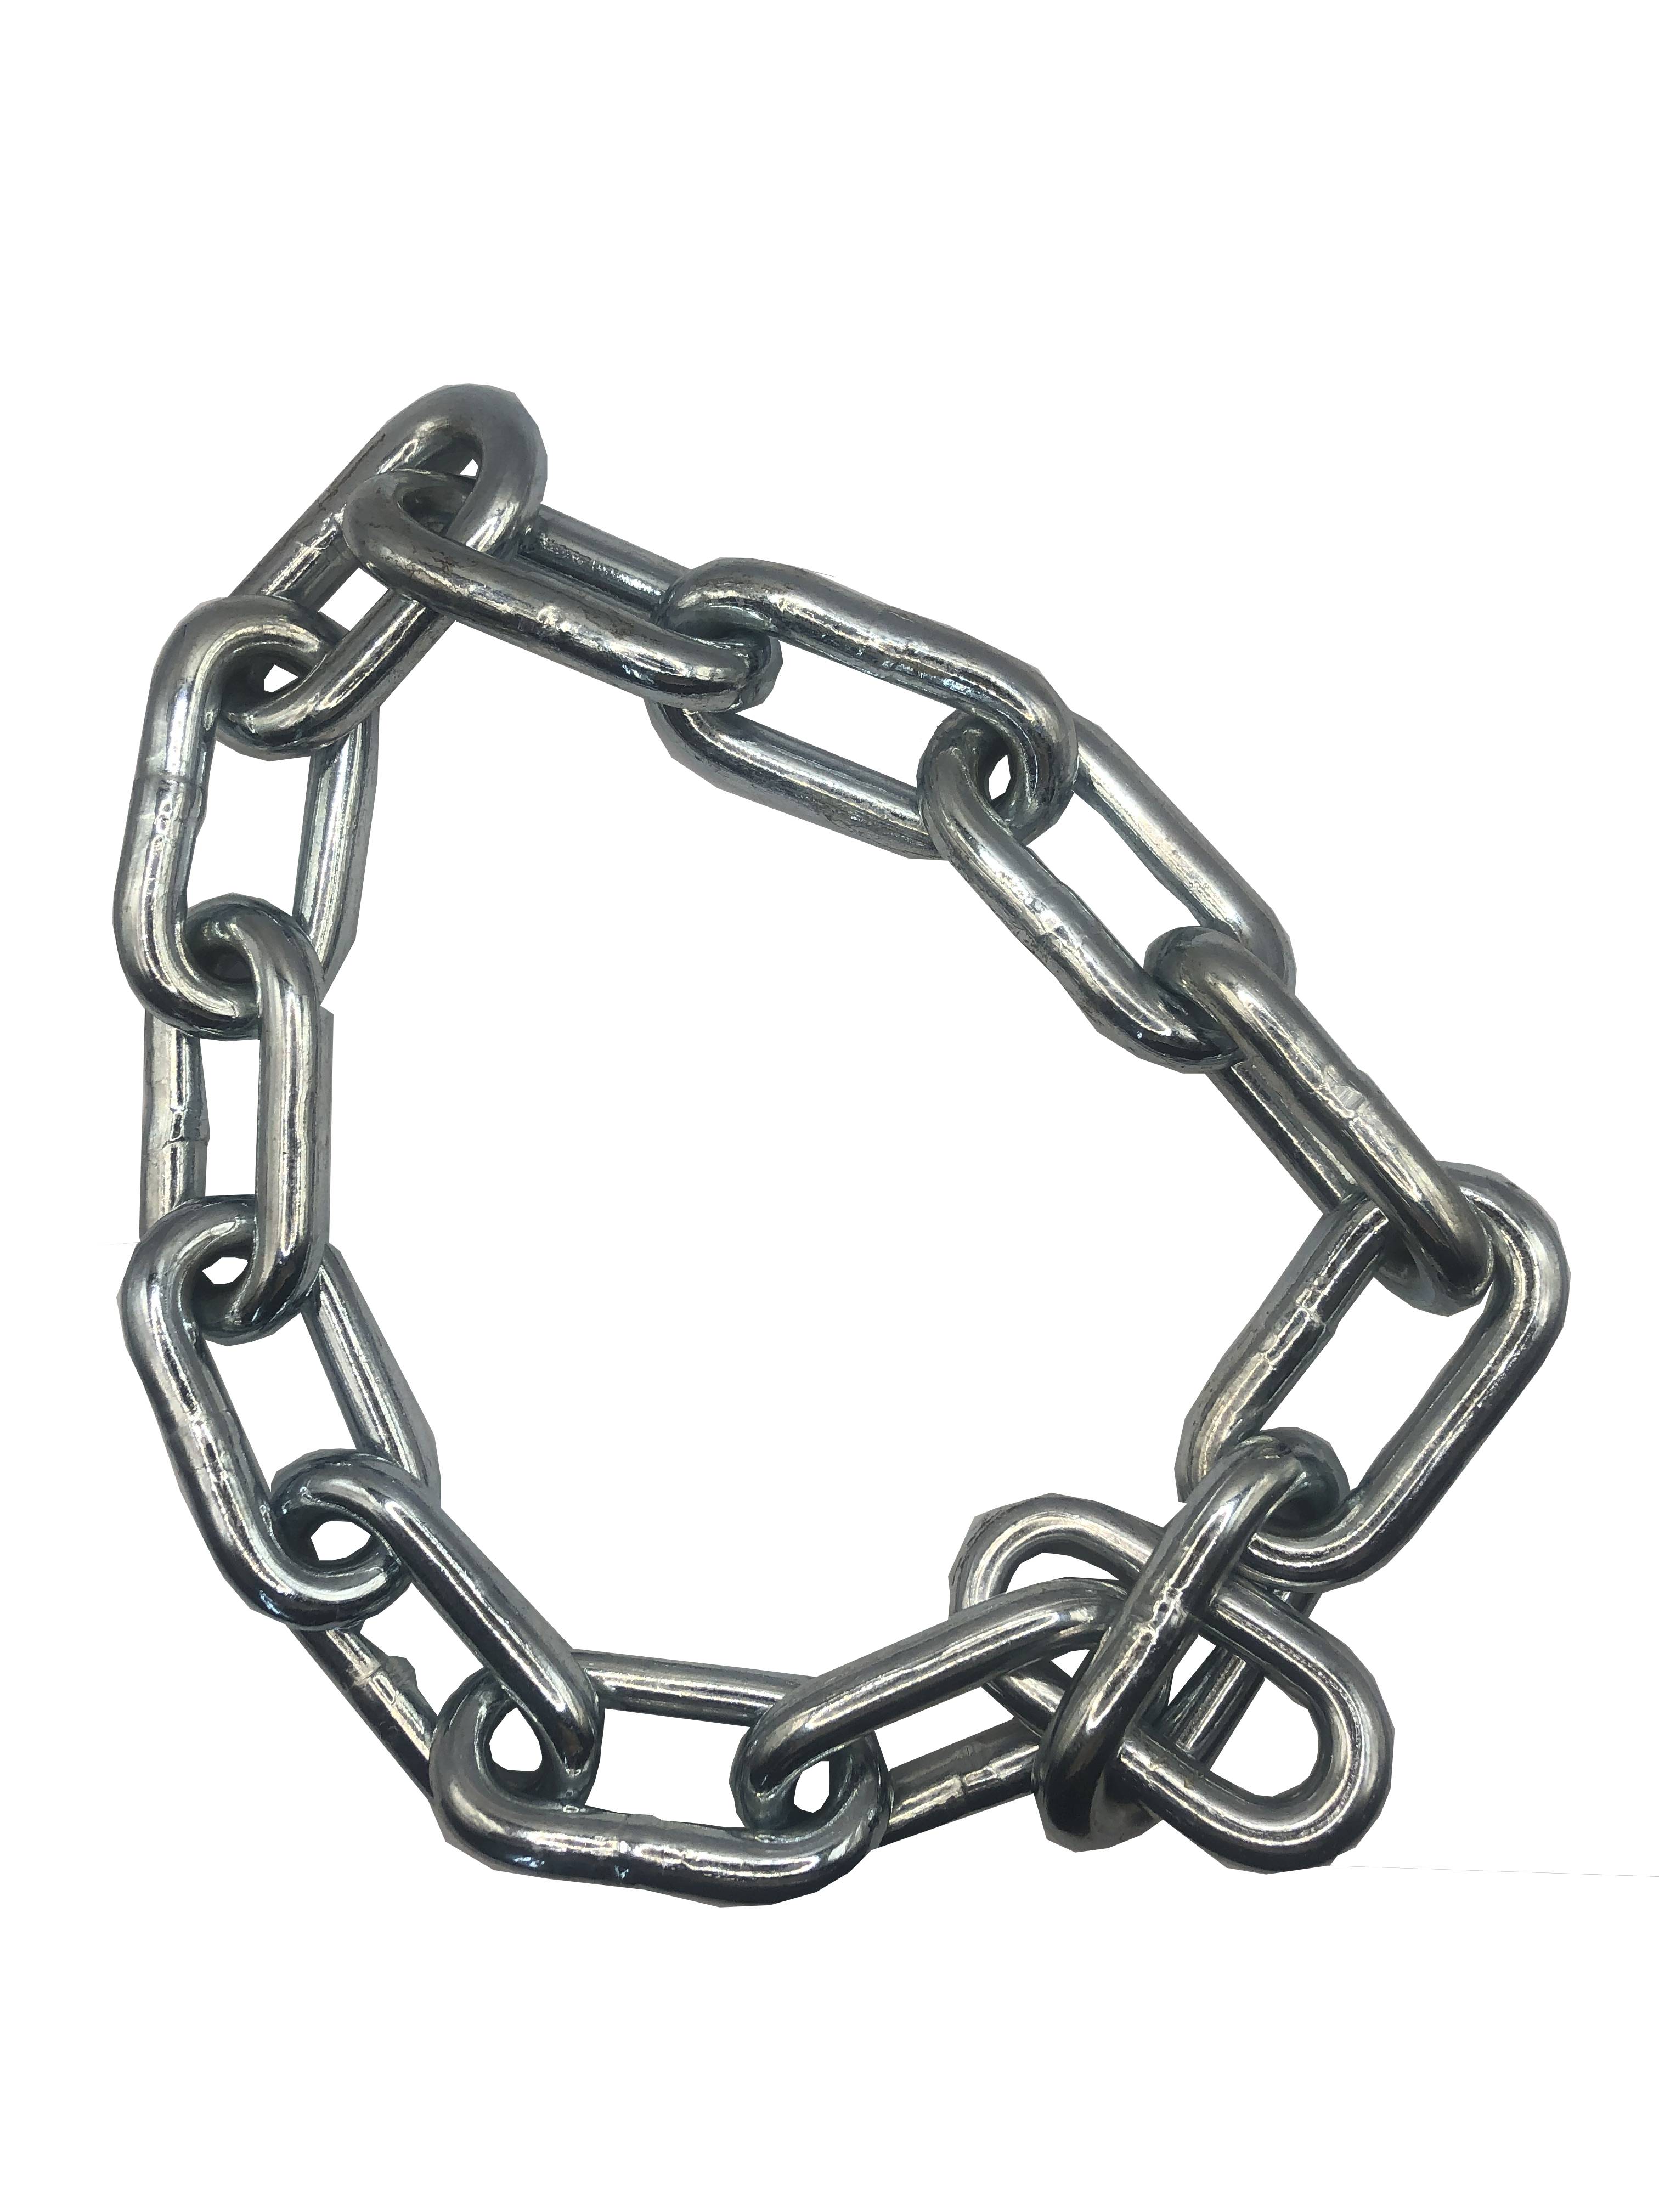 14mm Superlink Security Chain - Un-sleeved